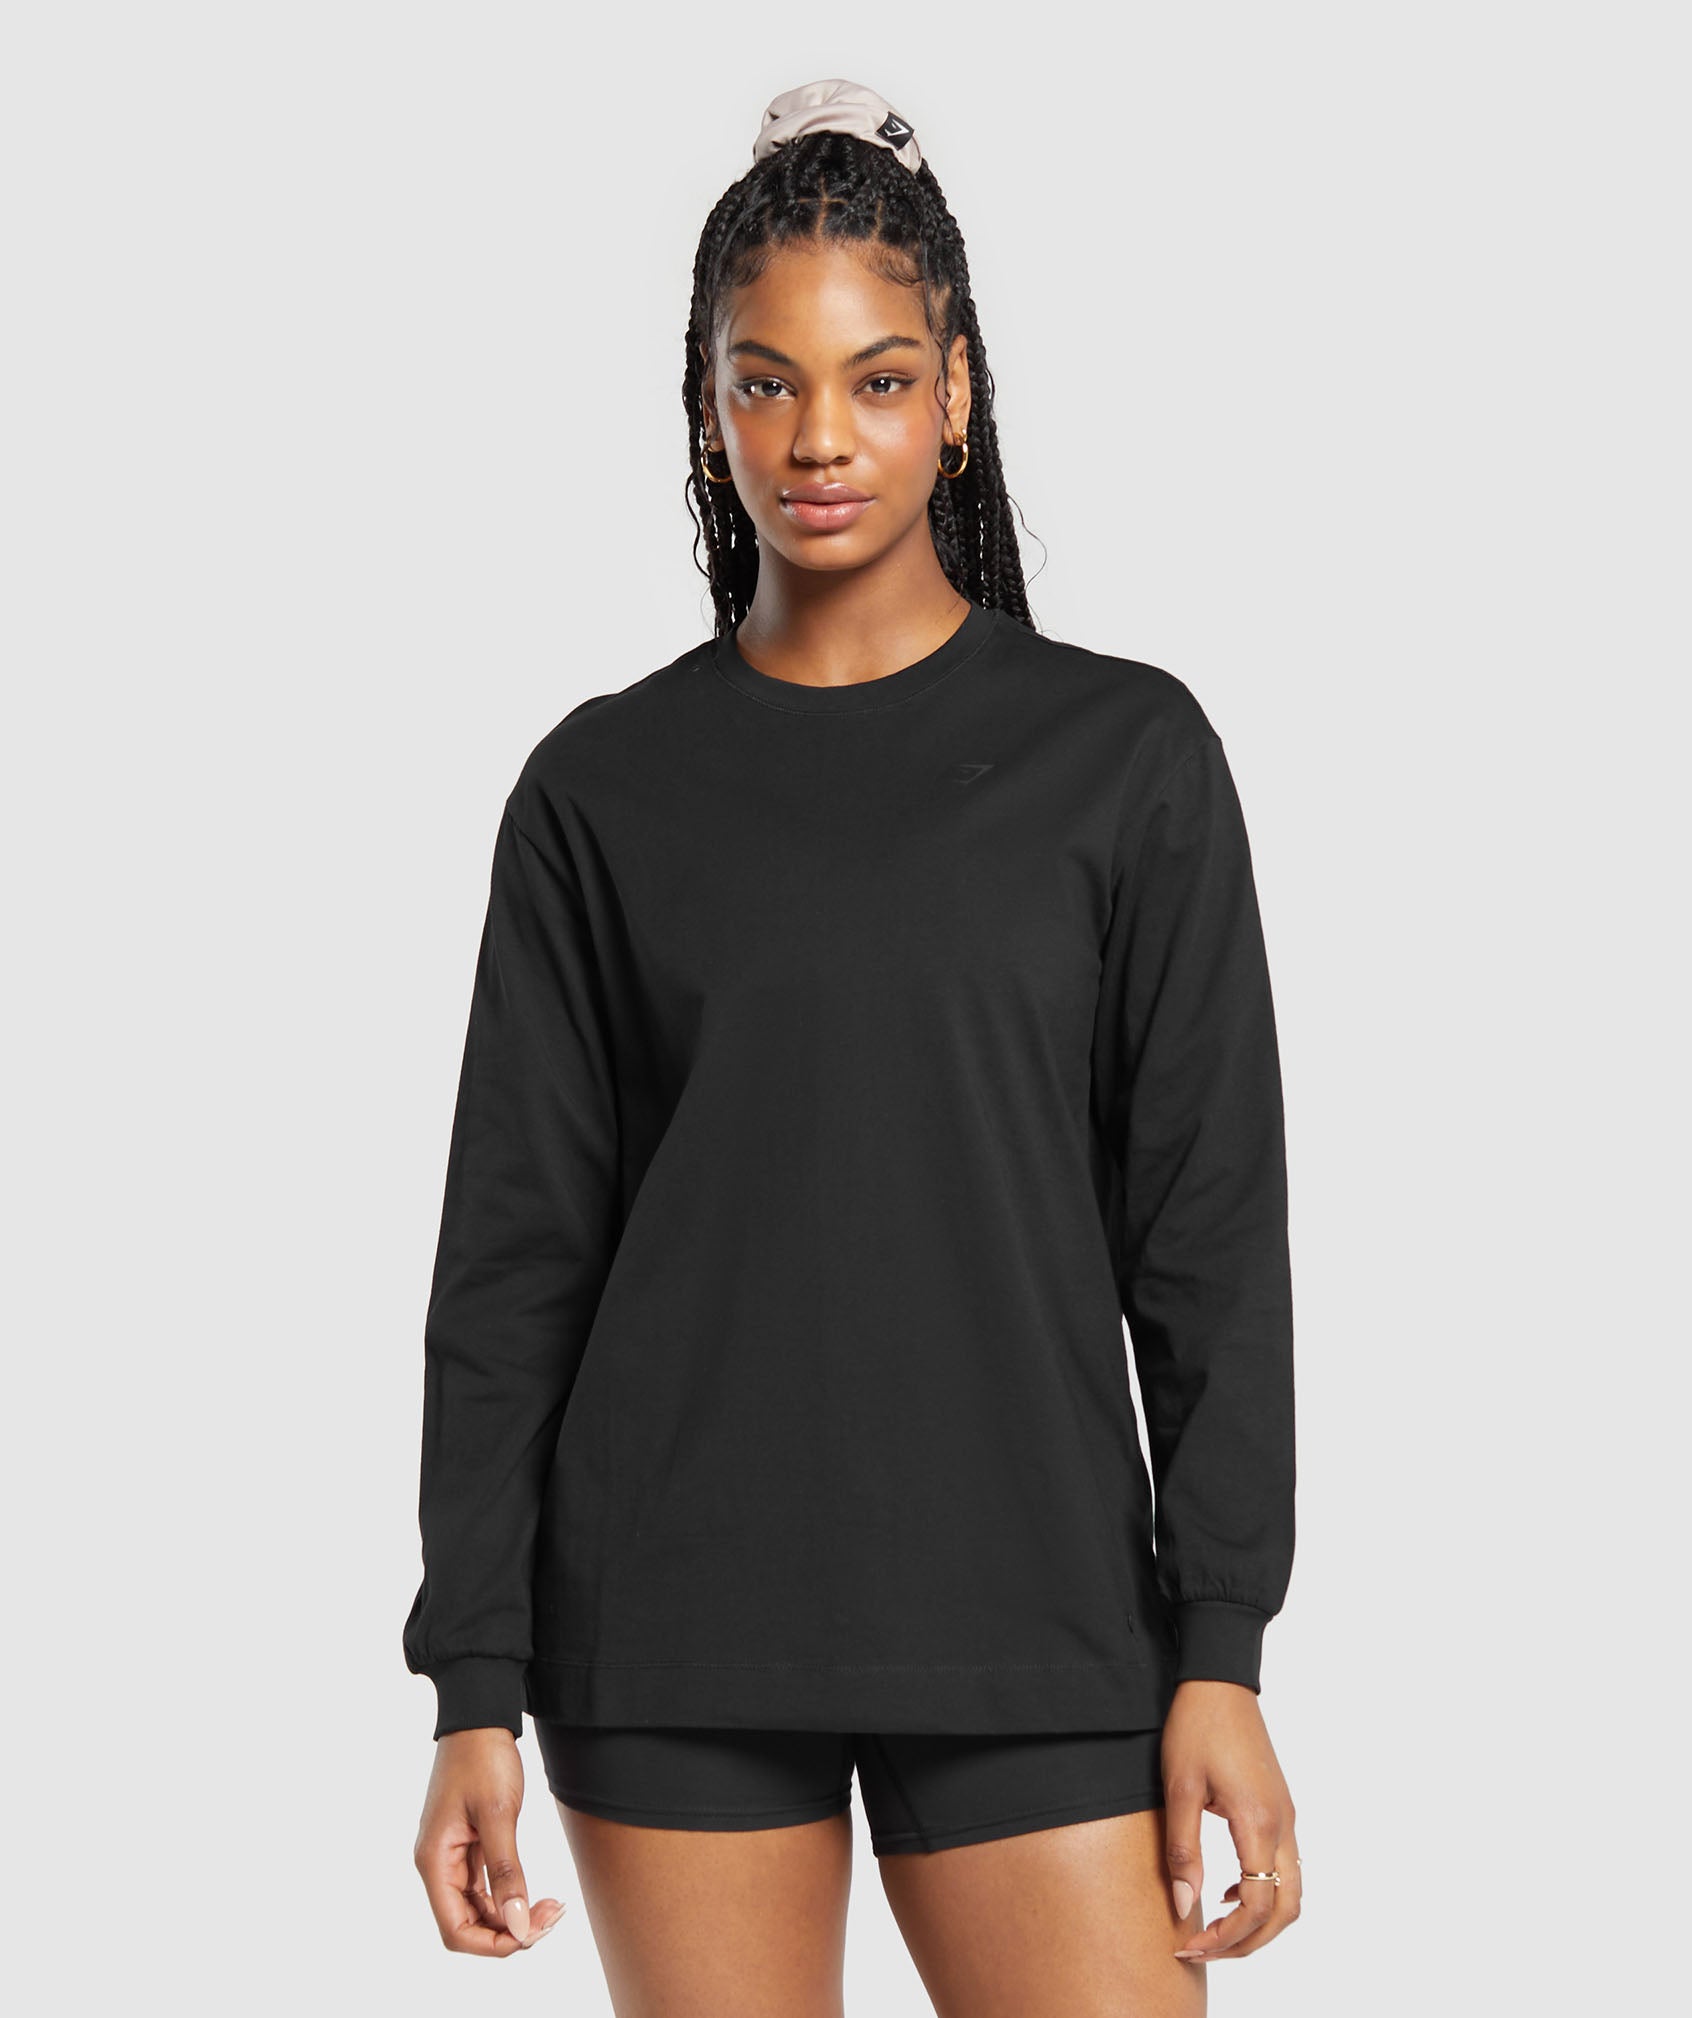 Cotton Oversized Long Sleeve Top in Black is out of stock